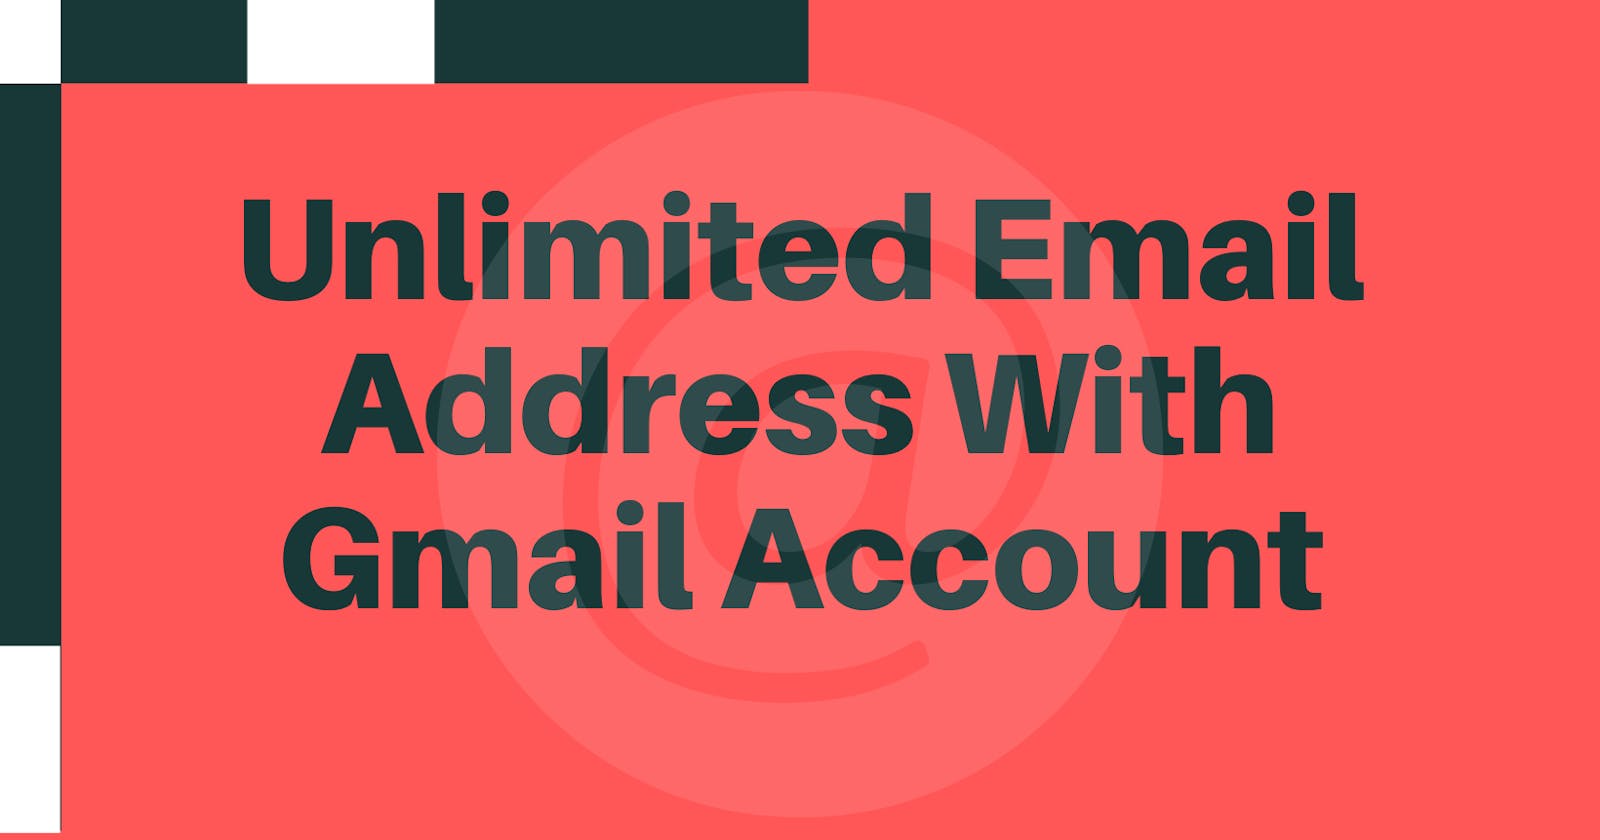 Unlimited Email Address With Gmail Account